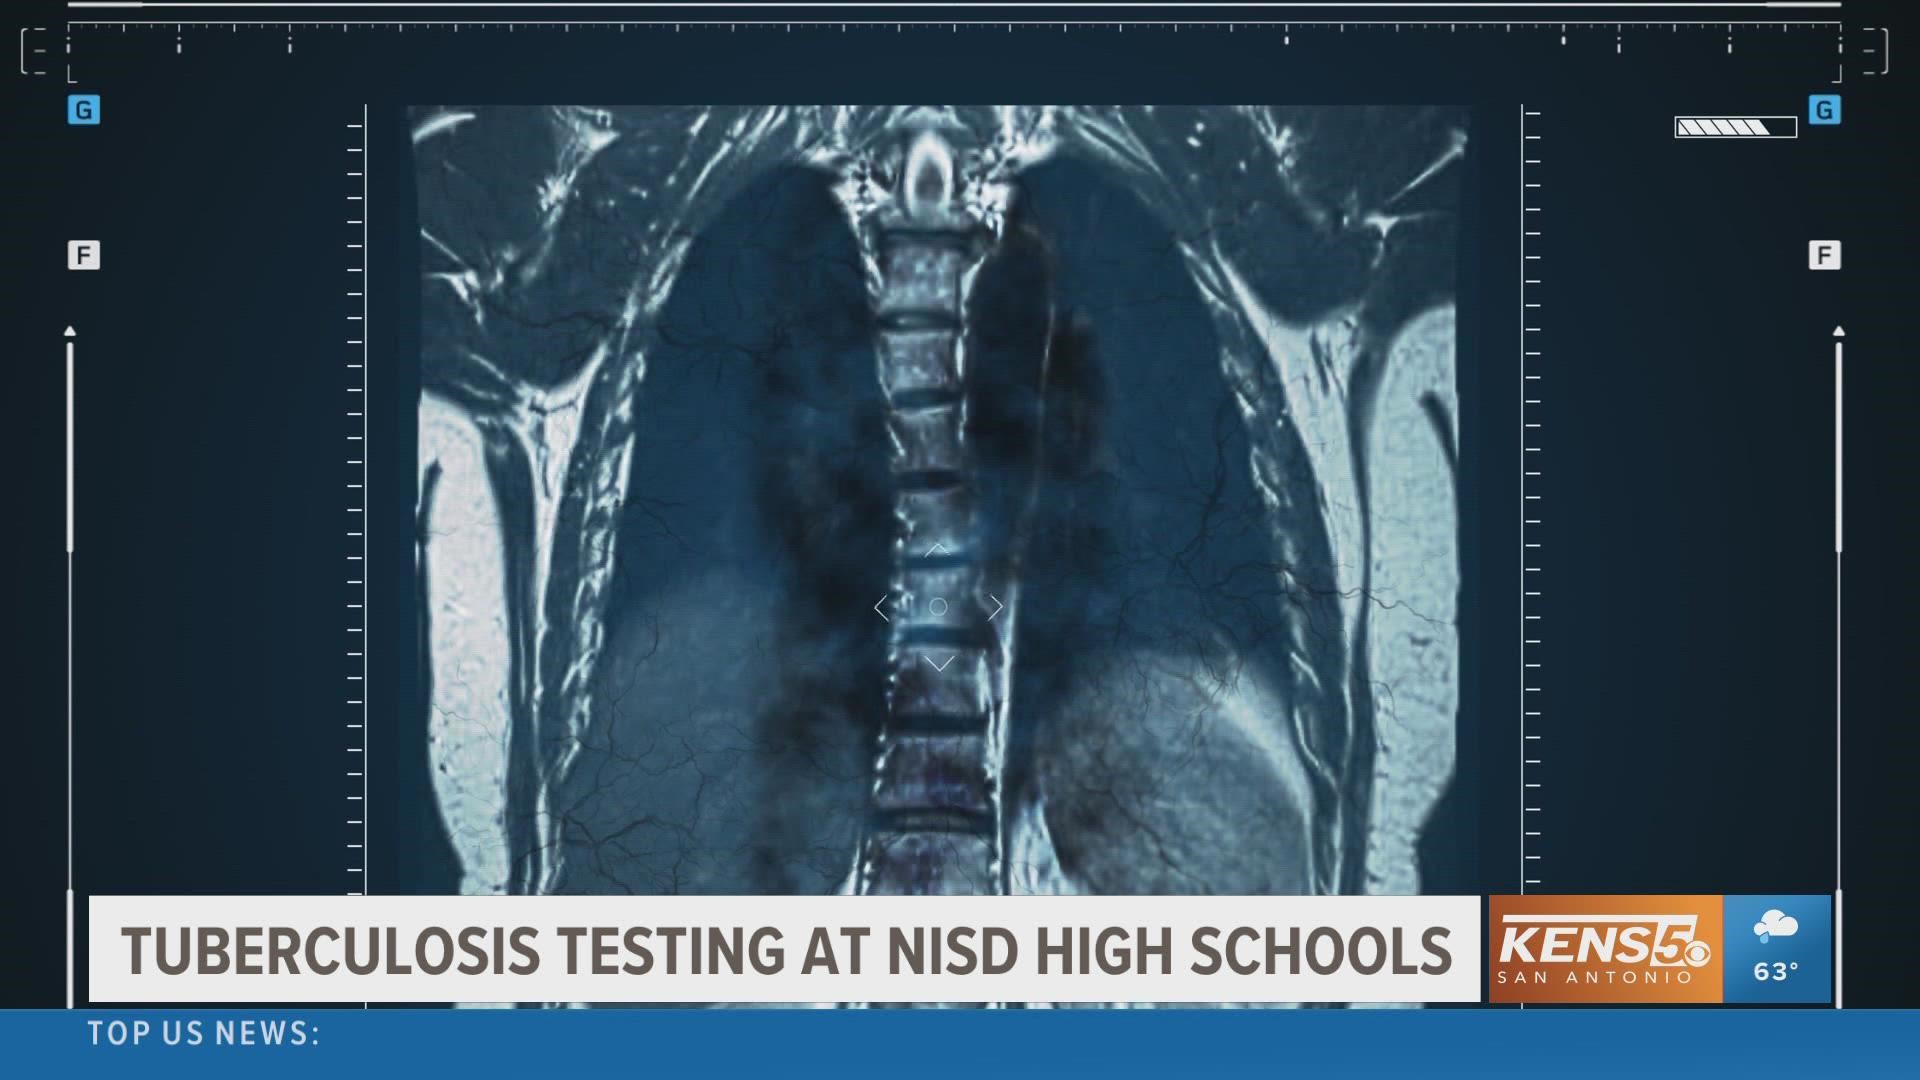 Multiple high schools in the district had students test positive